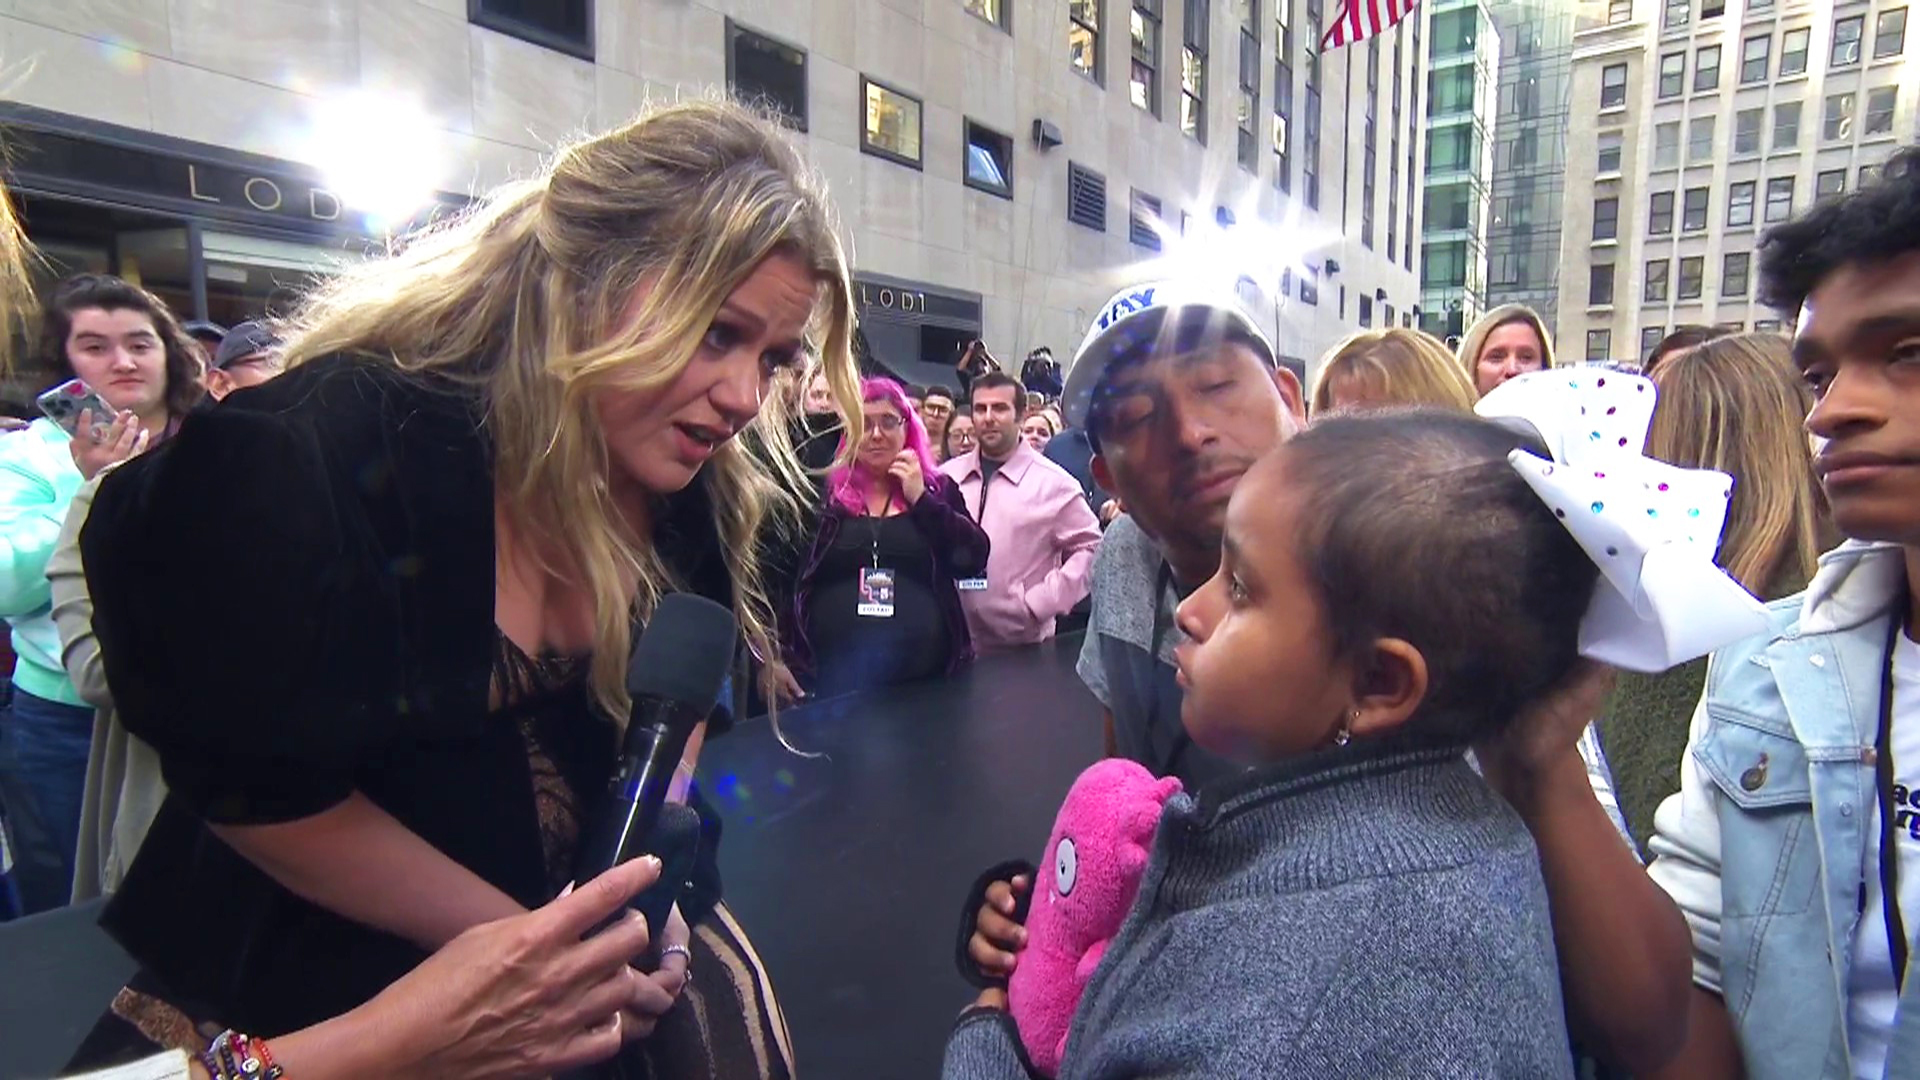 Watch Kelly Clarkson share inspiring words with special young fan